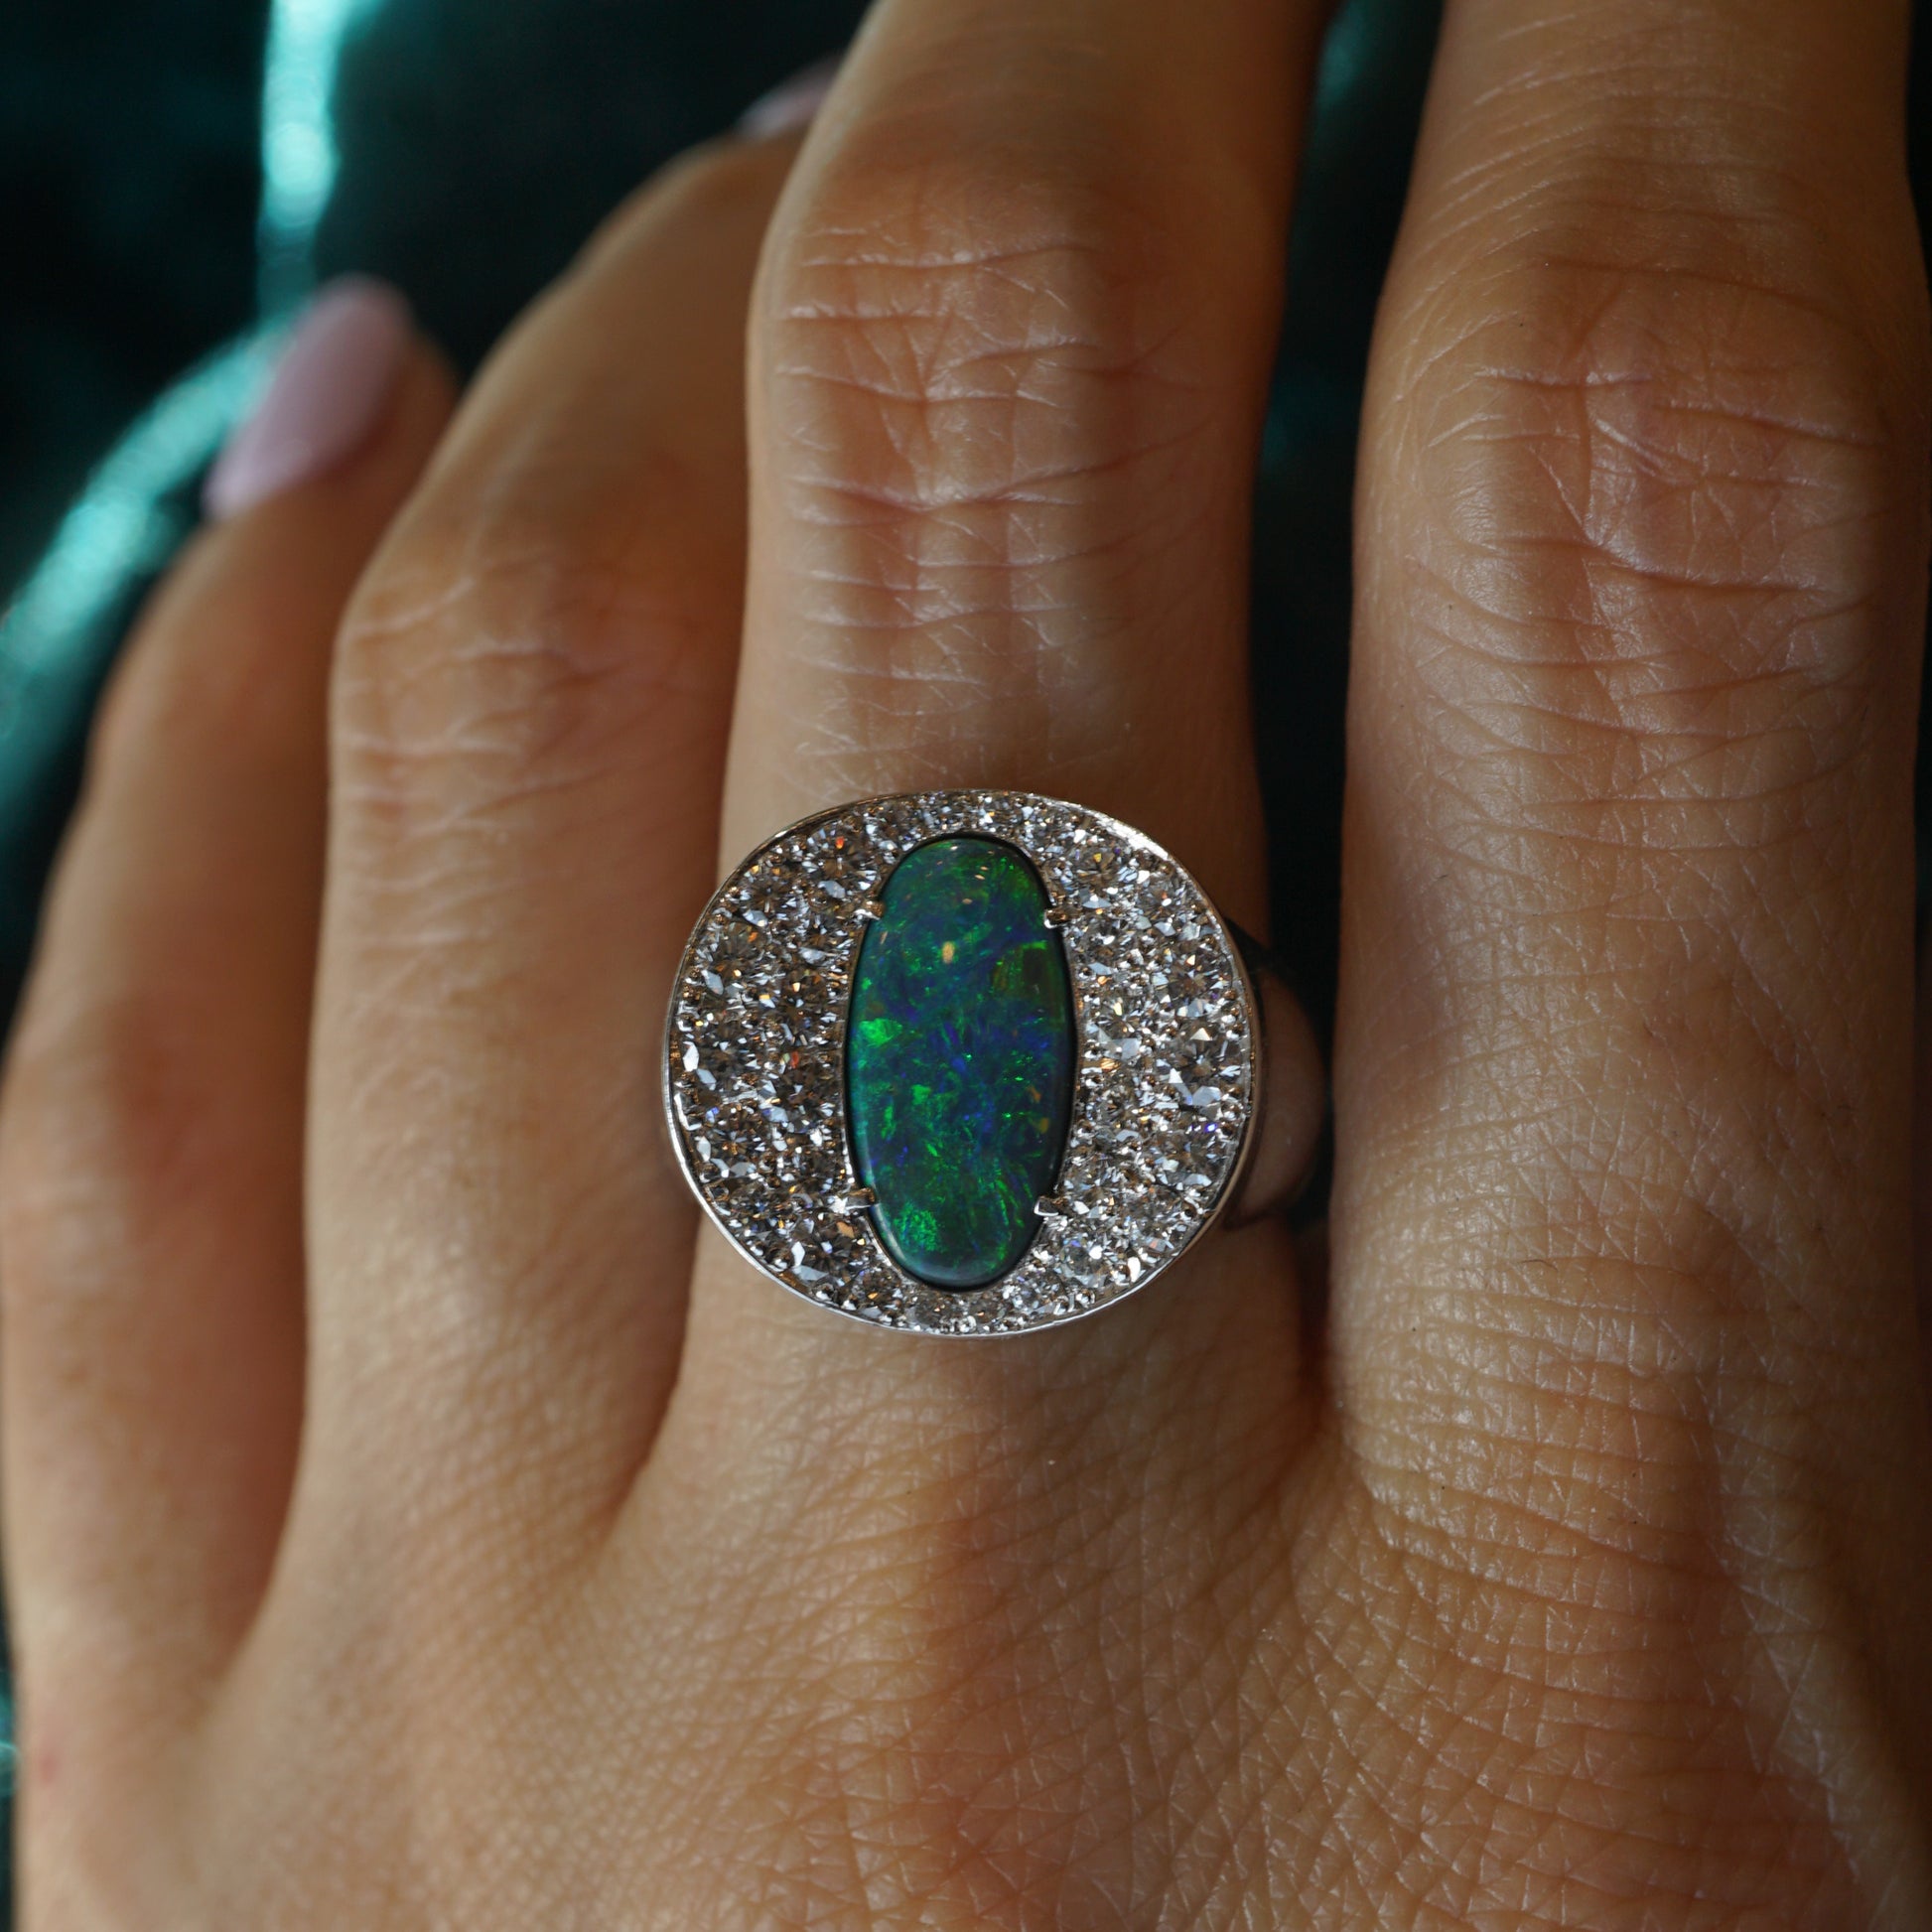 Pave Diamond & Opal Cocktail Ring in PlatinumComposition: PlatinumRing Size: 6Total Diamond Weight: .80 ctTotal Gram Weight: 11.4 gInscription: PLATINUM